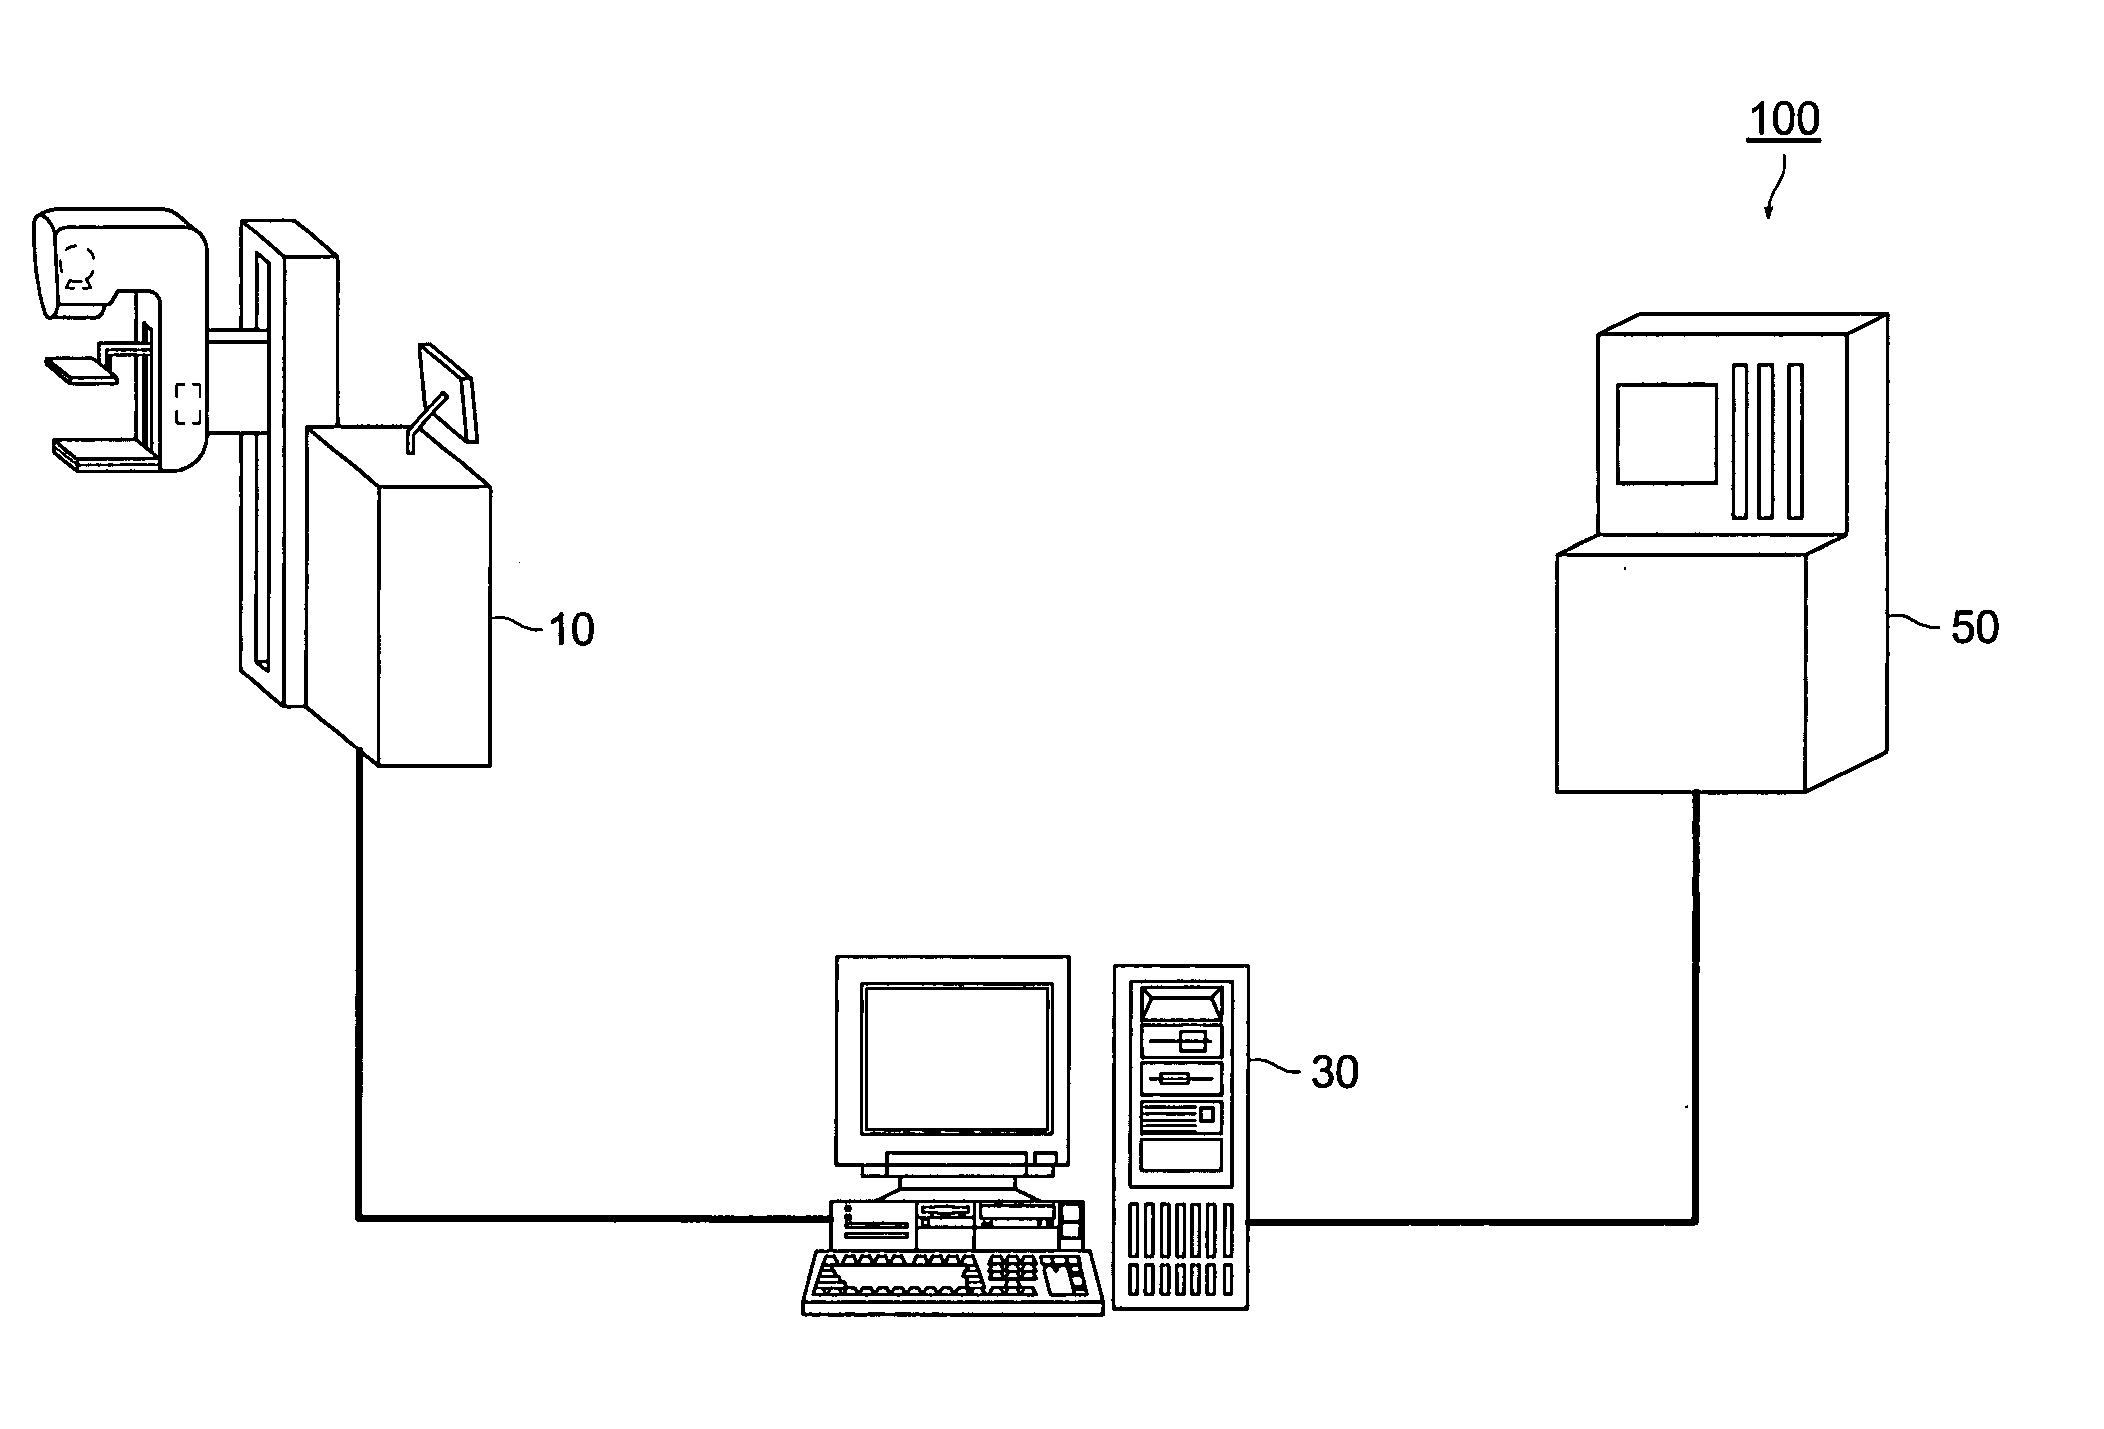 Mammographic system and apparatus